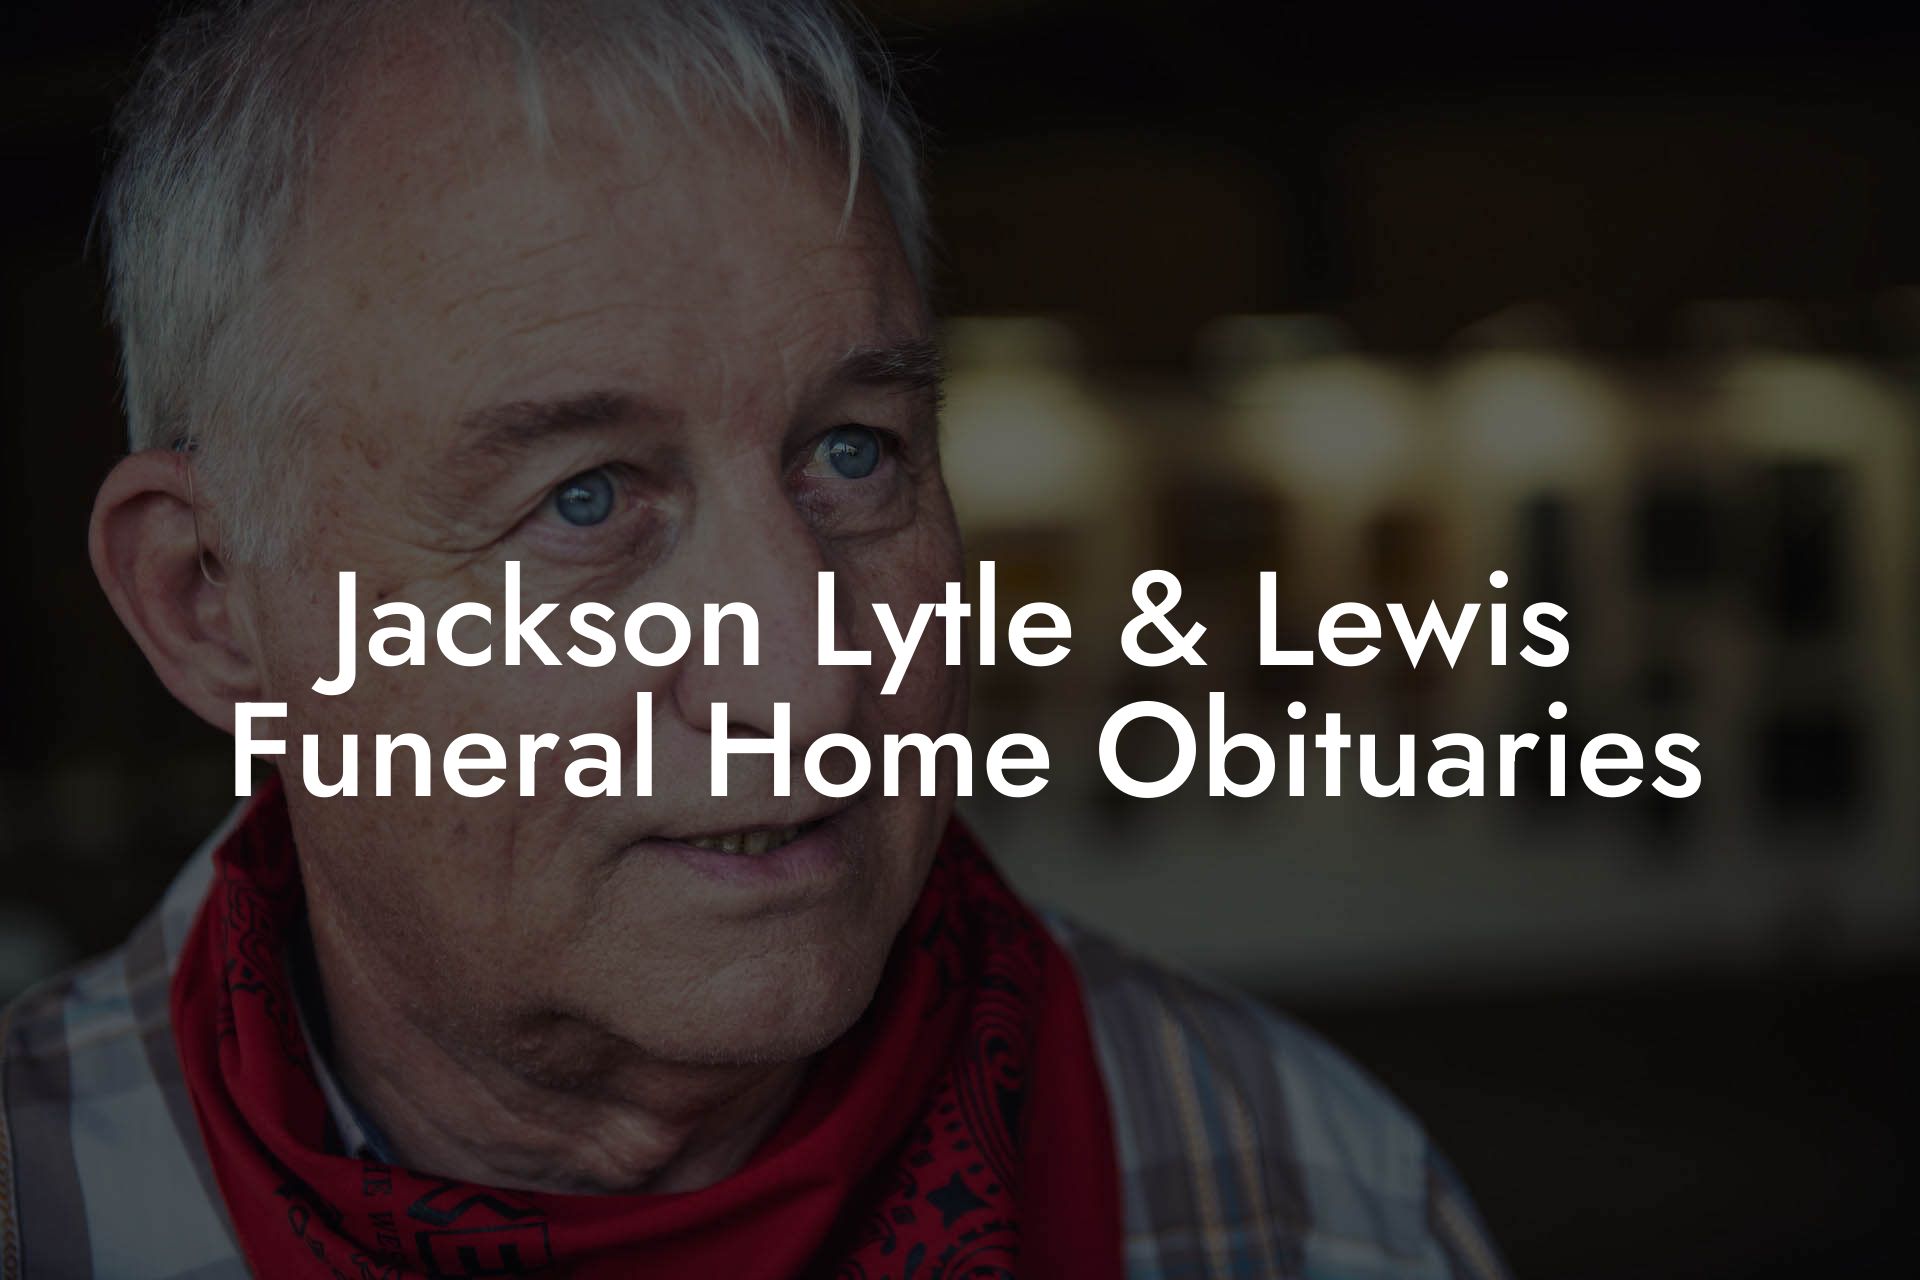 Jackson Lytle & Lewis Funeral Home Obituaries